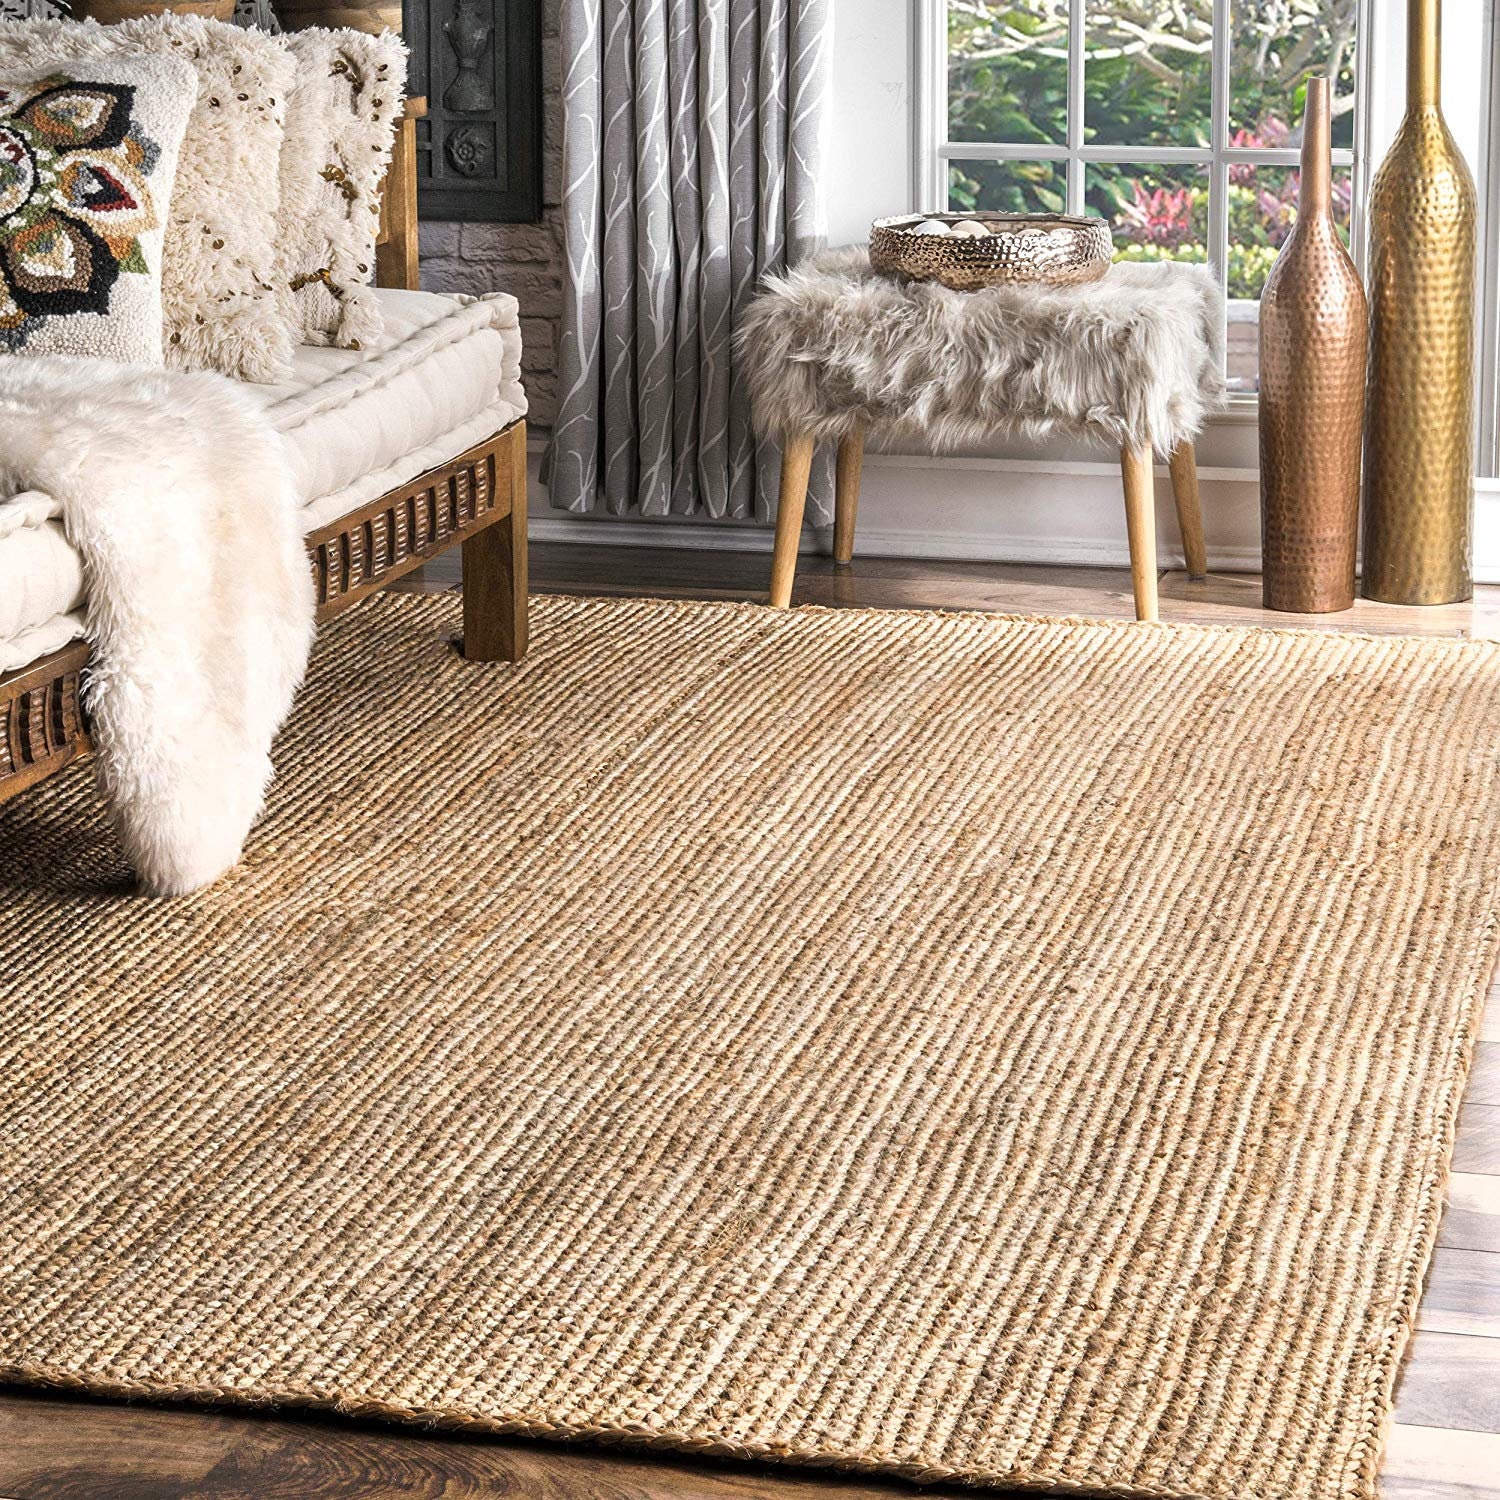 Rectangle Cotton Made Hand Braided Living Room Area Rugs Floor Mats 90X90 CM 